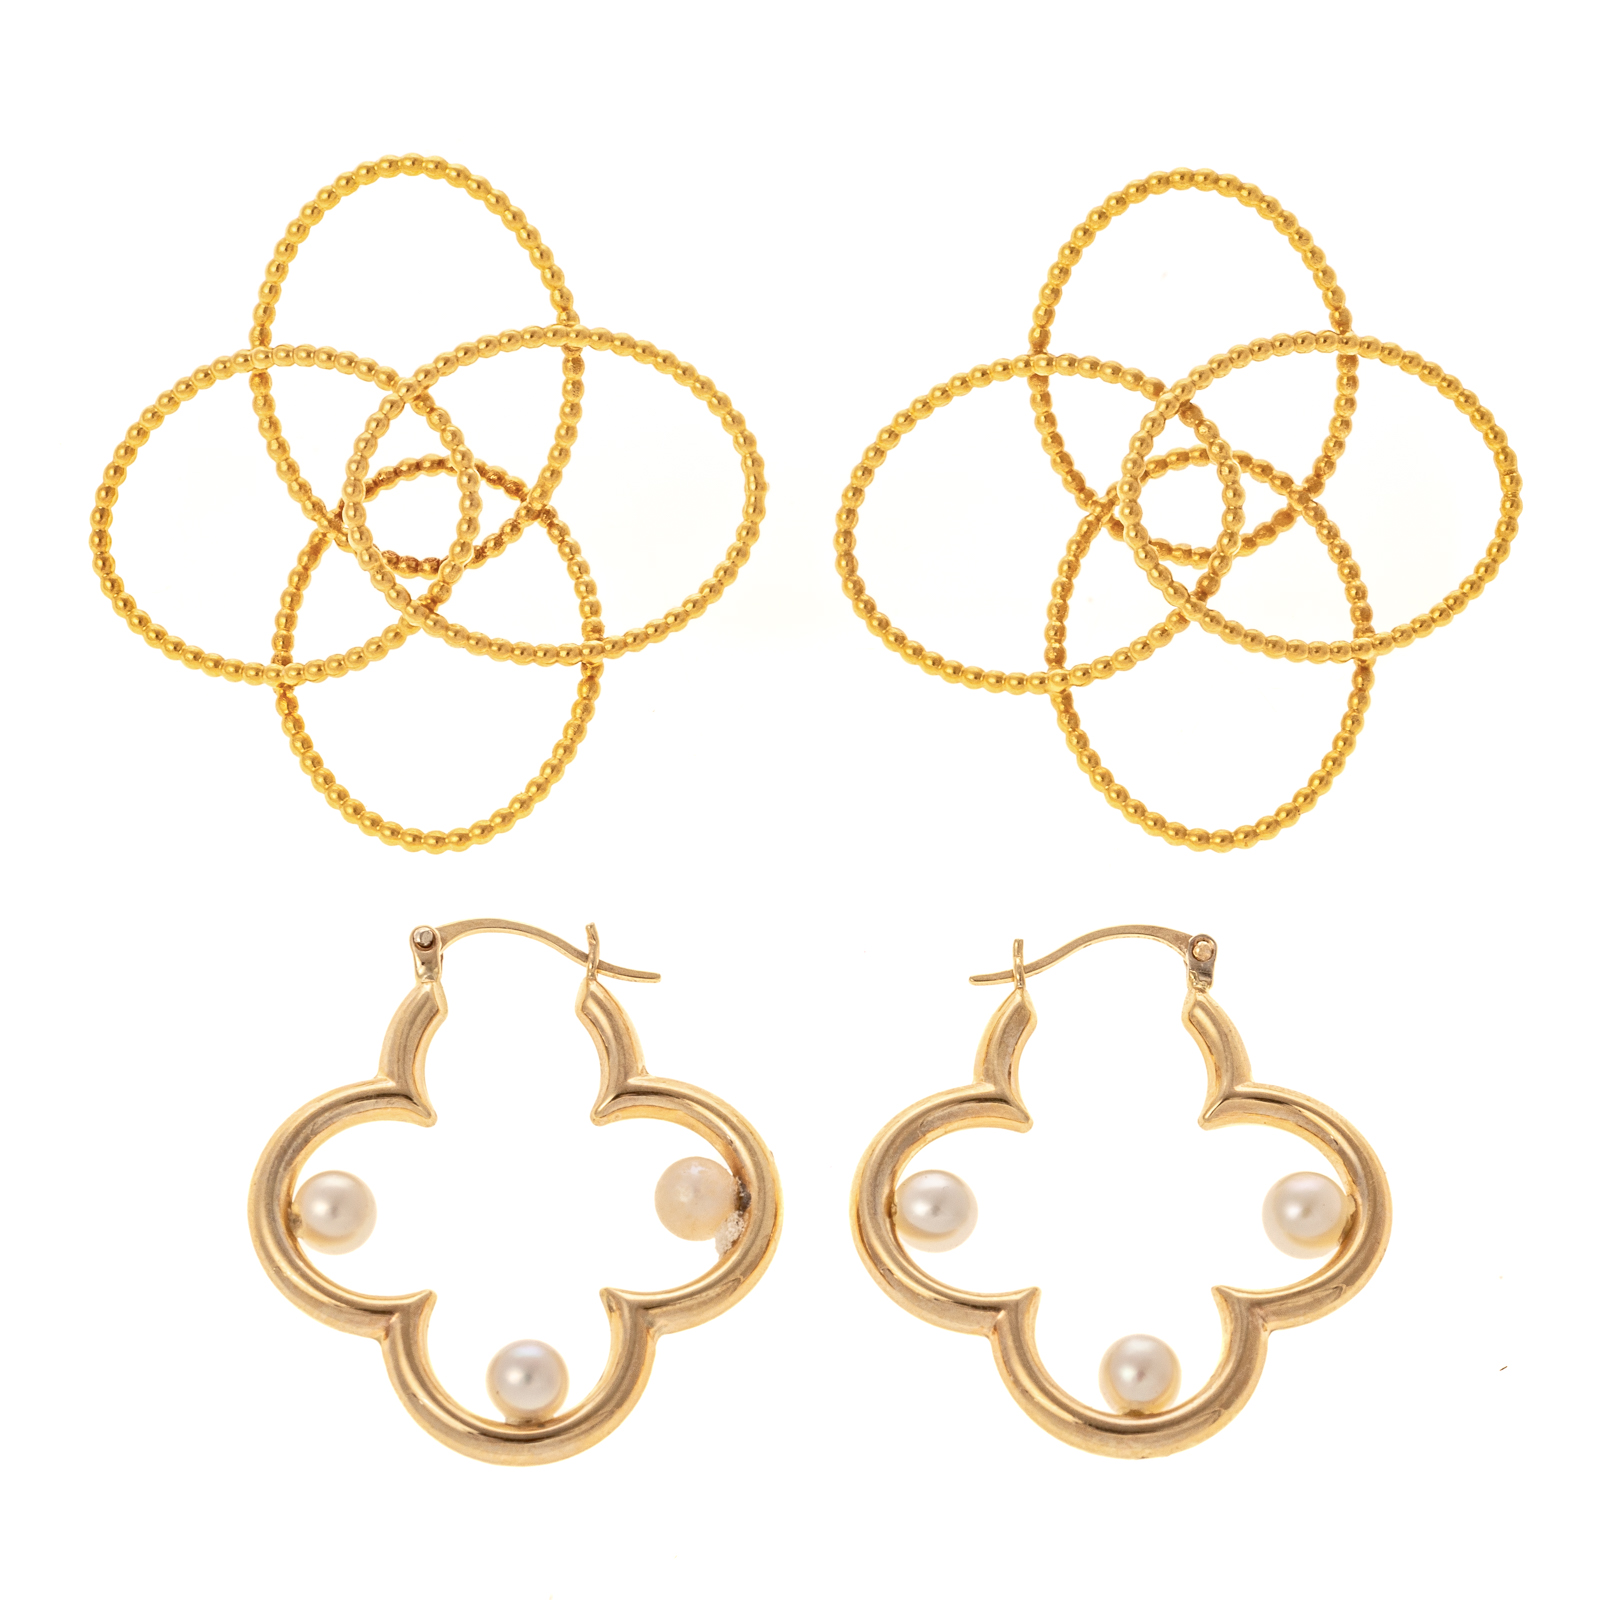 TWO PAIRS OF STYLIZED ROSETTE EARRINGS